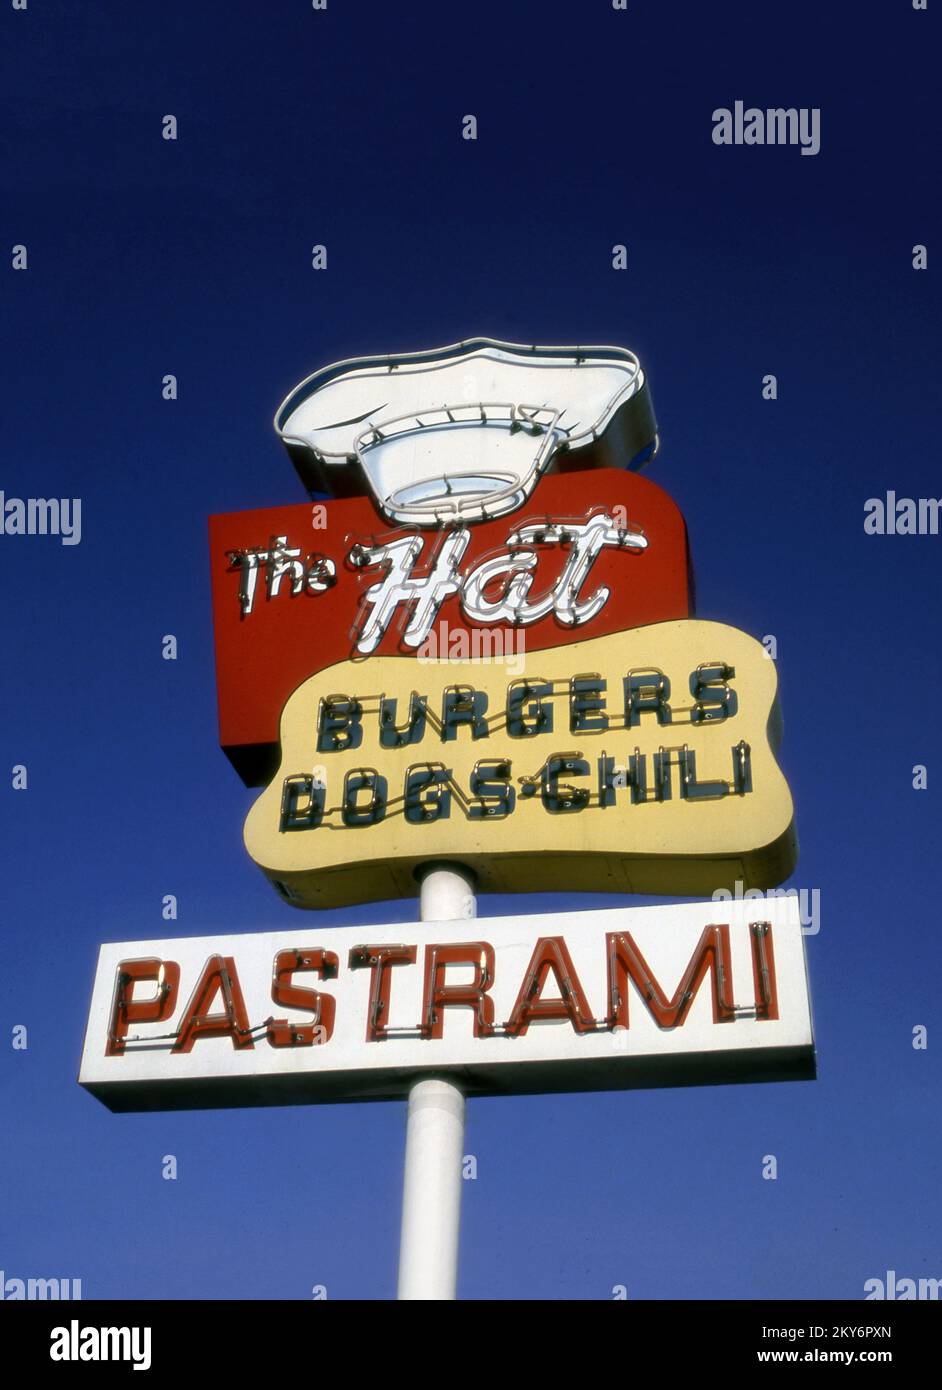 Roadside sign for The Hat, a food stand famous for thier pastrtami sandwiches in Monterey Park, CA Stock Photo